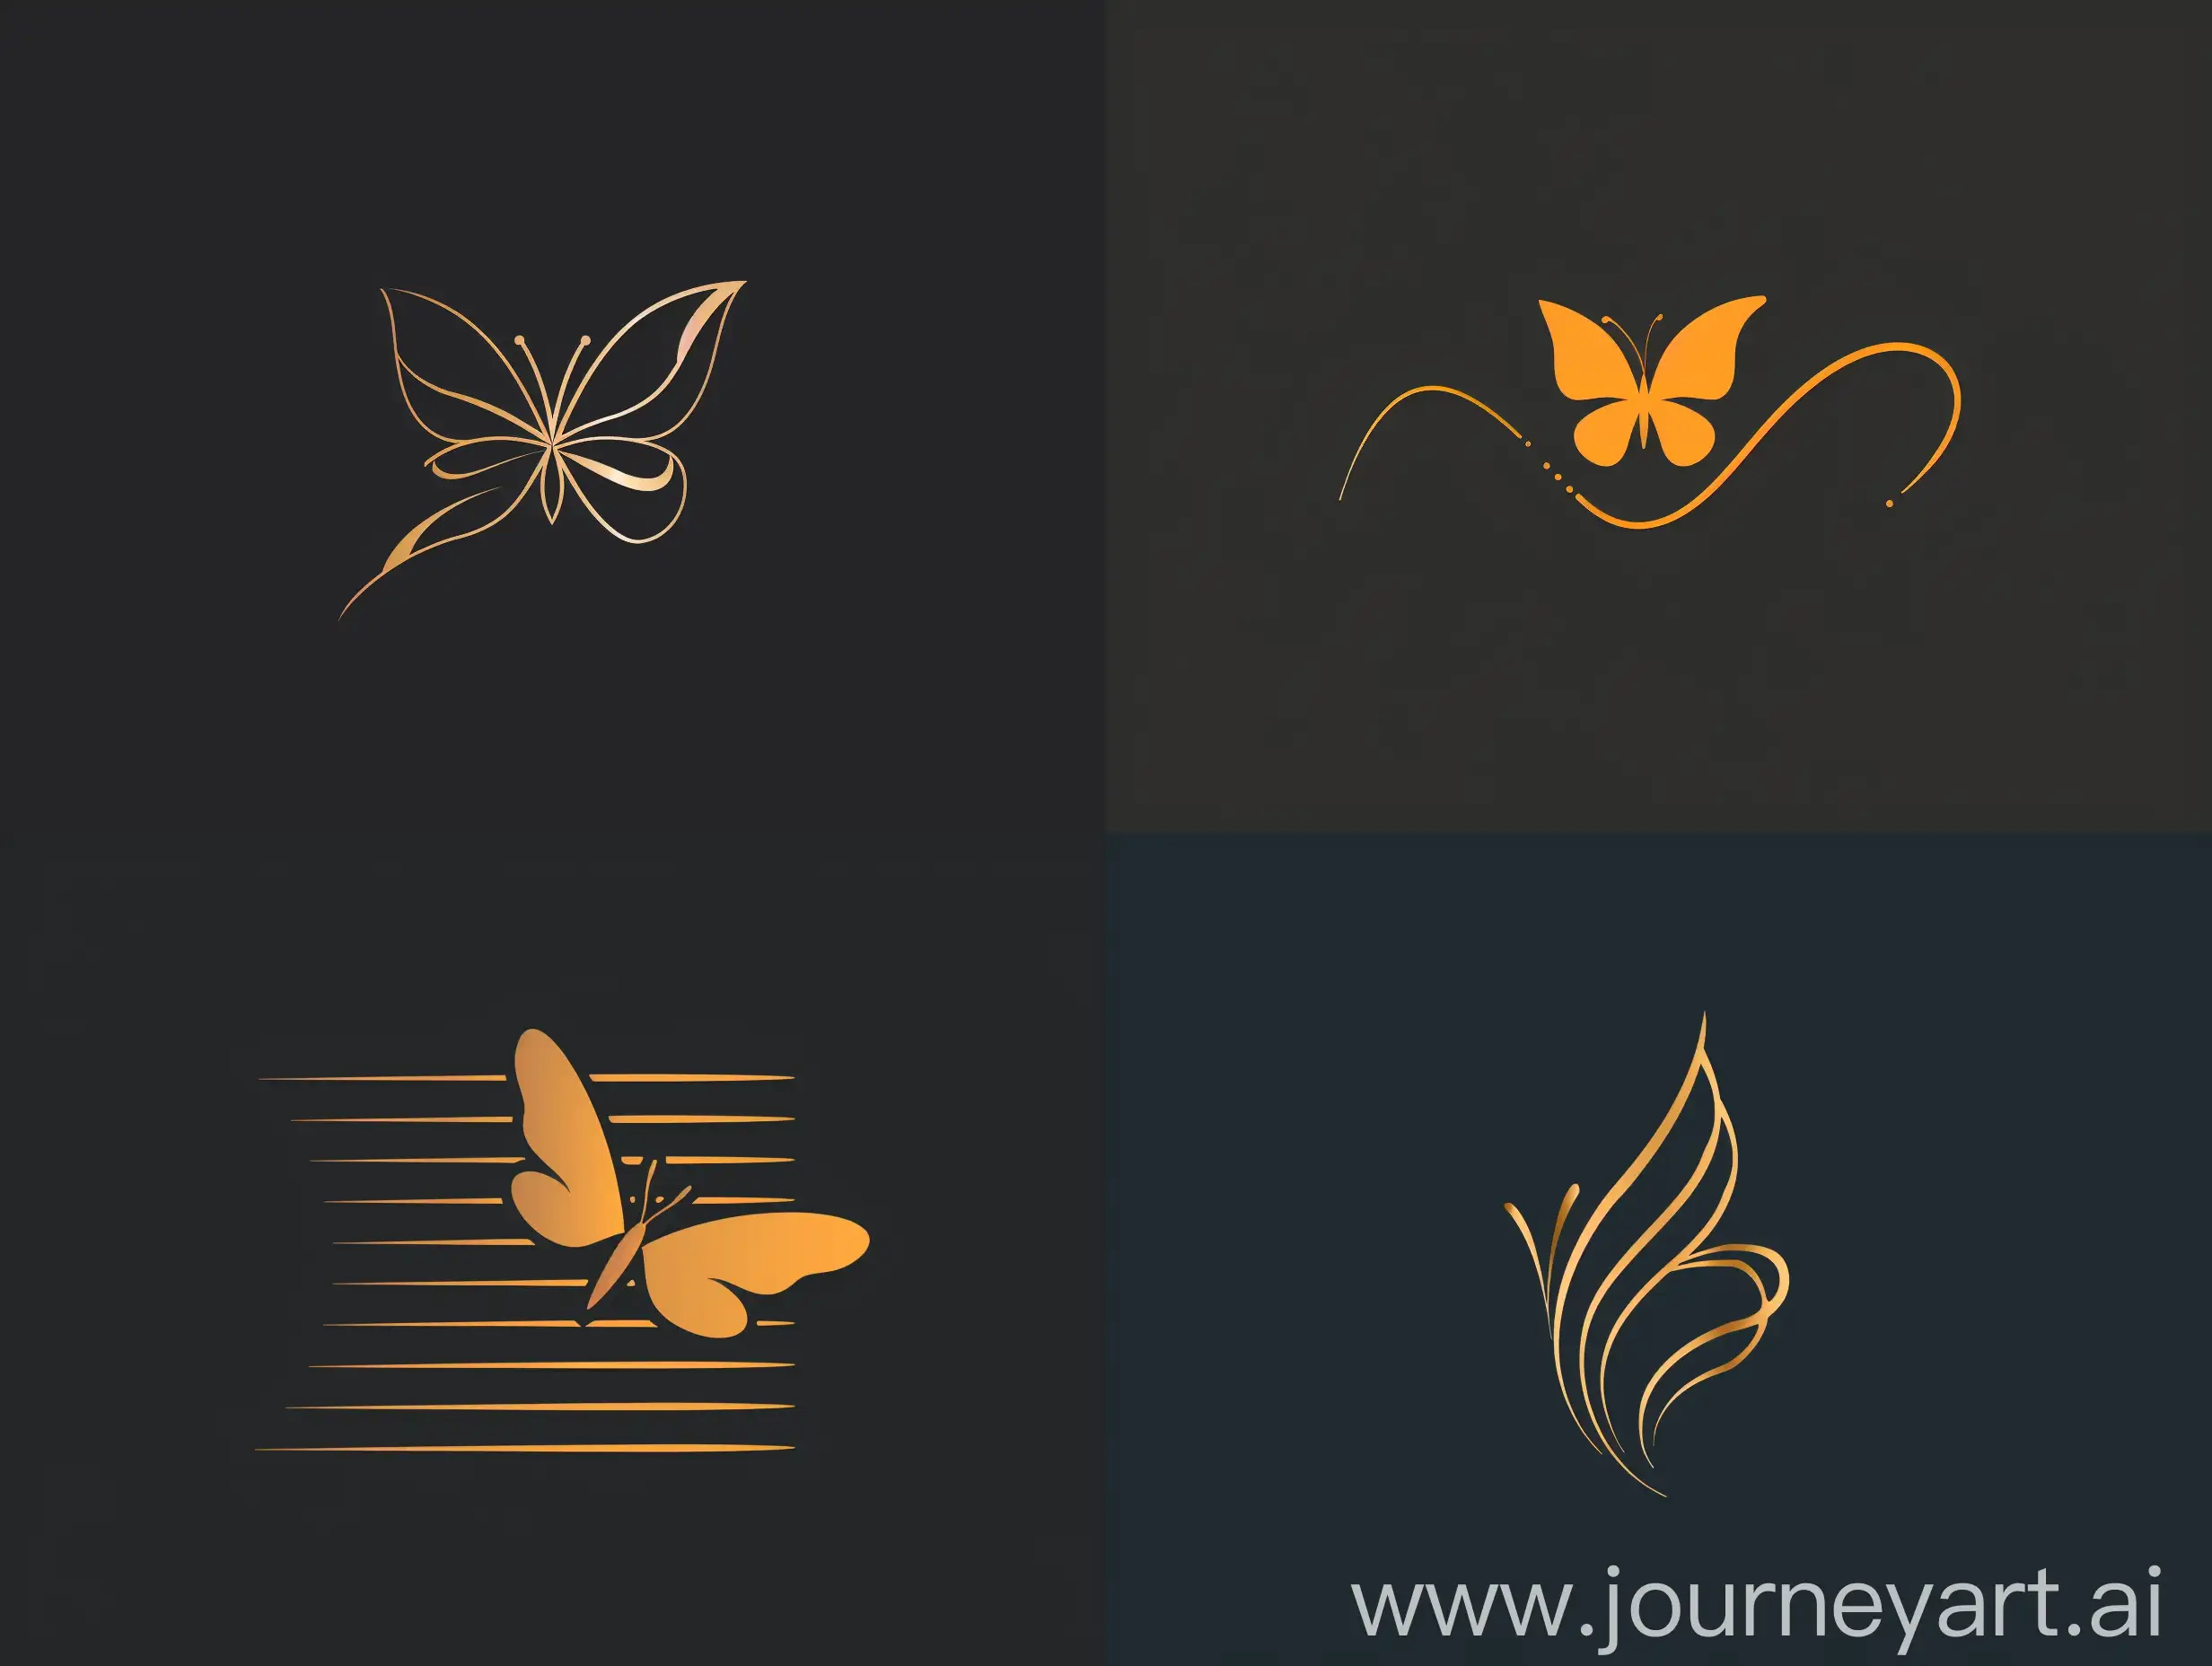 Elegant-Calligraphic-Logo-with-Butterfly-Accent-in-Minimalistic-Style